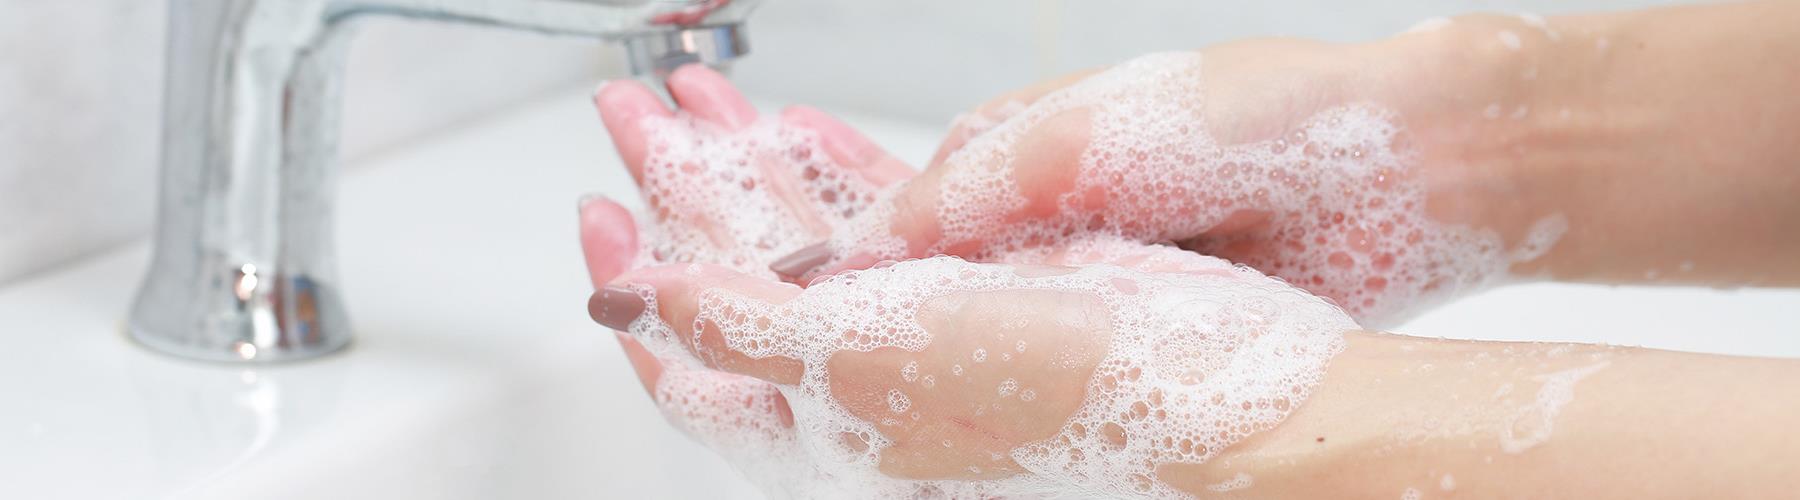 Hands covered with suds during hand washing.